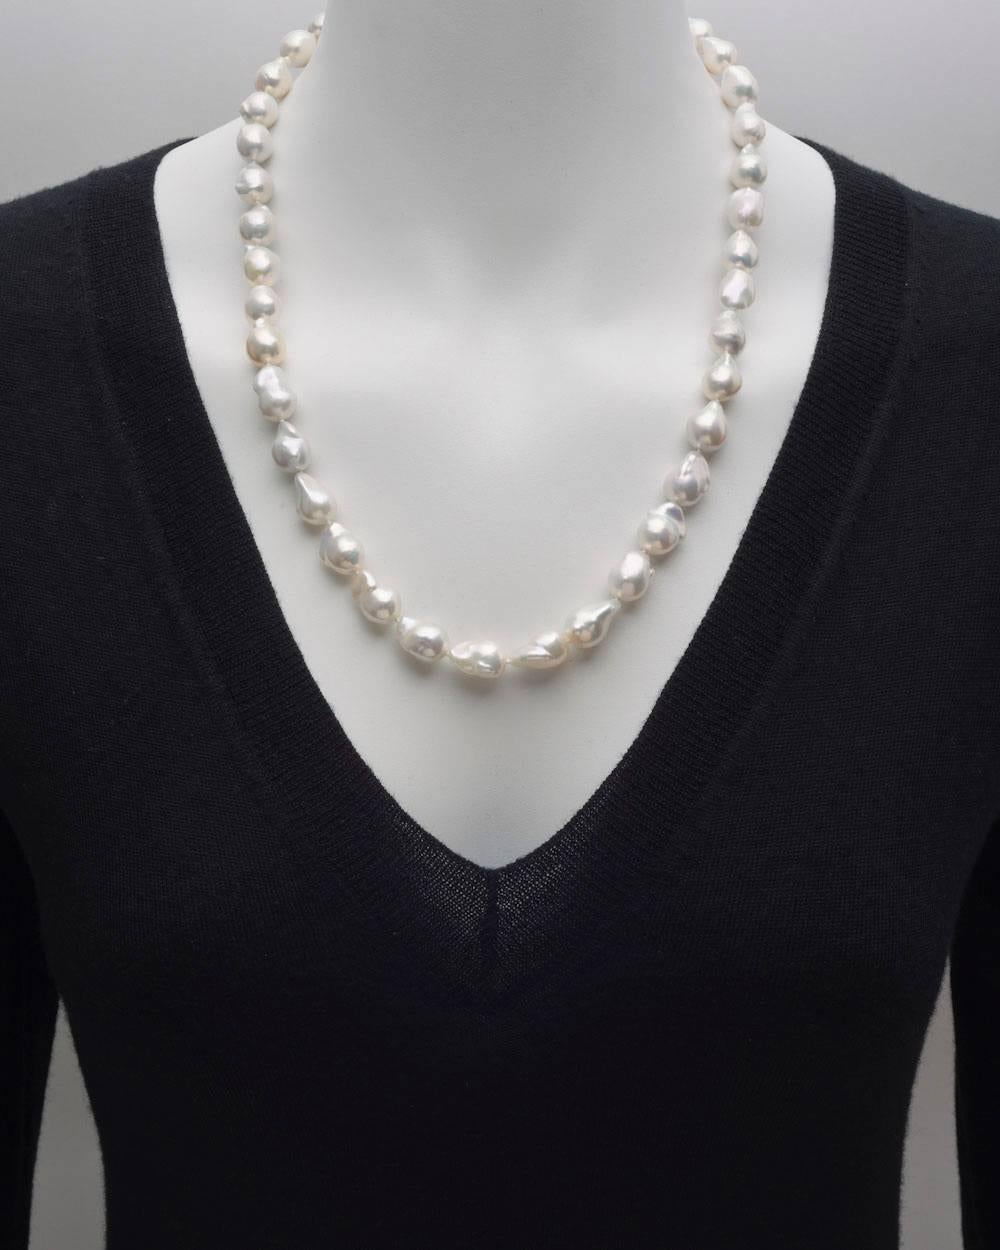 Cultured baroque pearl necklace, composed of 39 pearls measuring approximately 10 to 14mm in diameter, secured by a navette-shaped, fisherman-style hook14k yellow gold clasp. 23